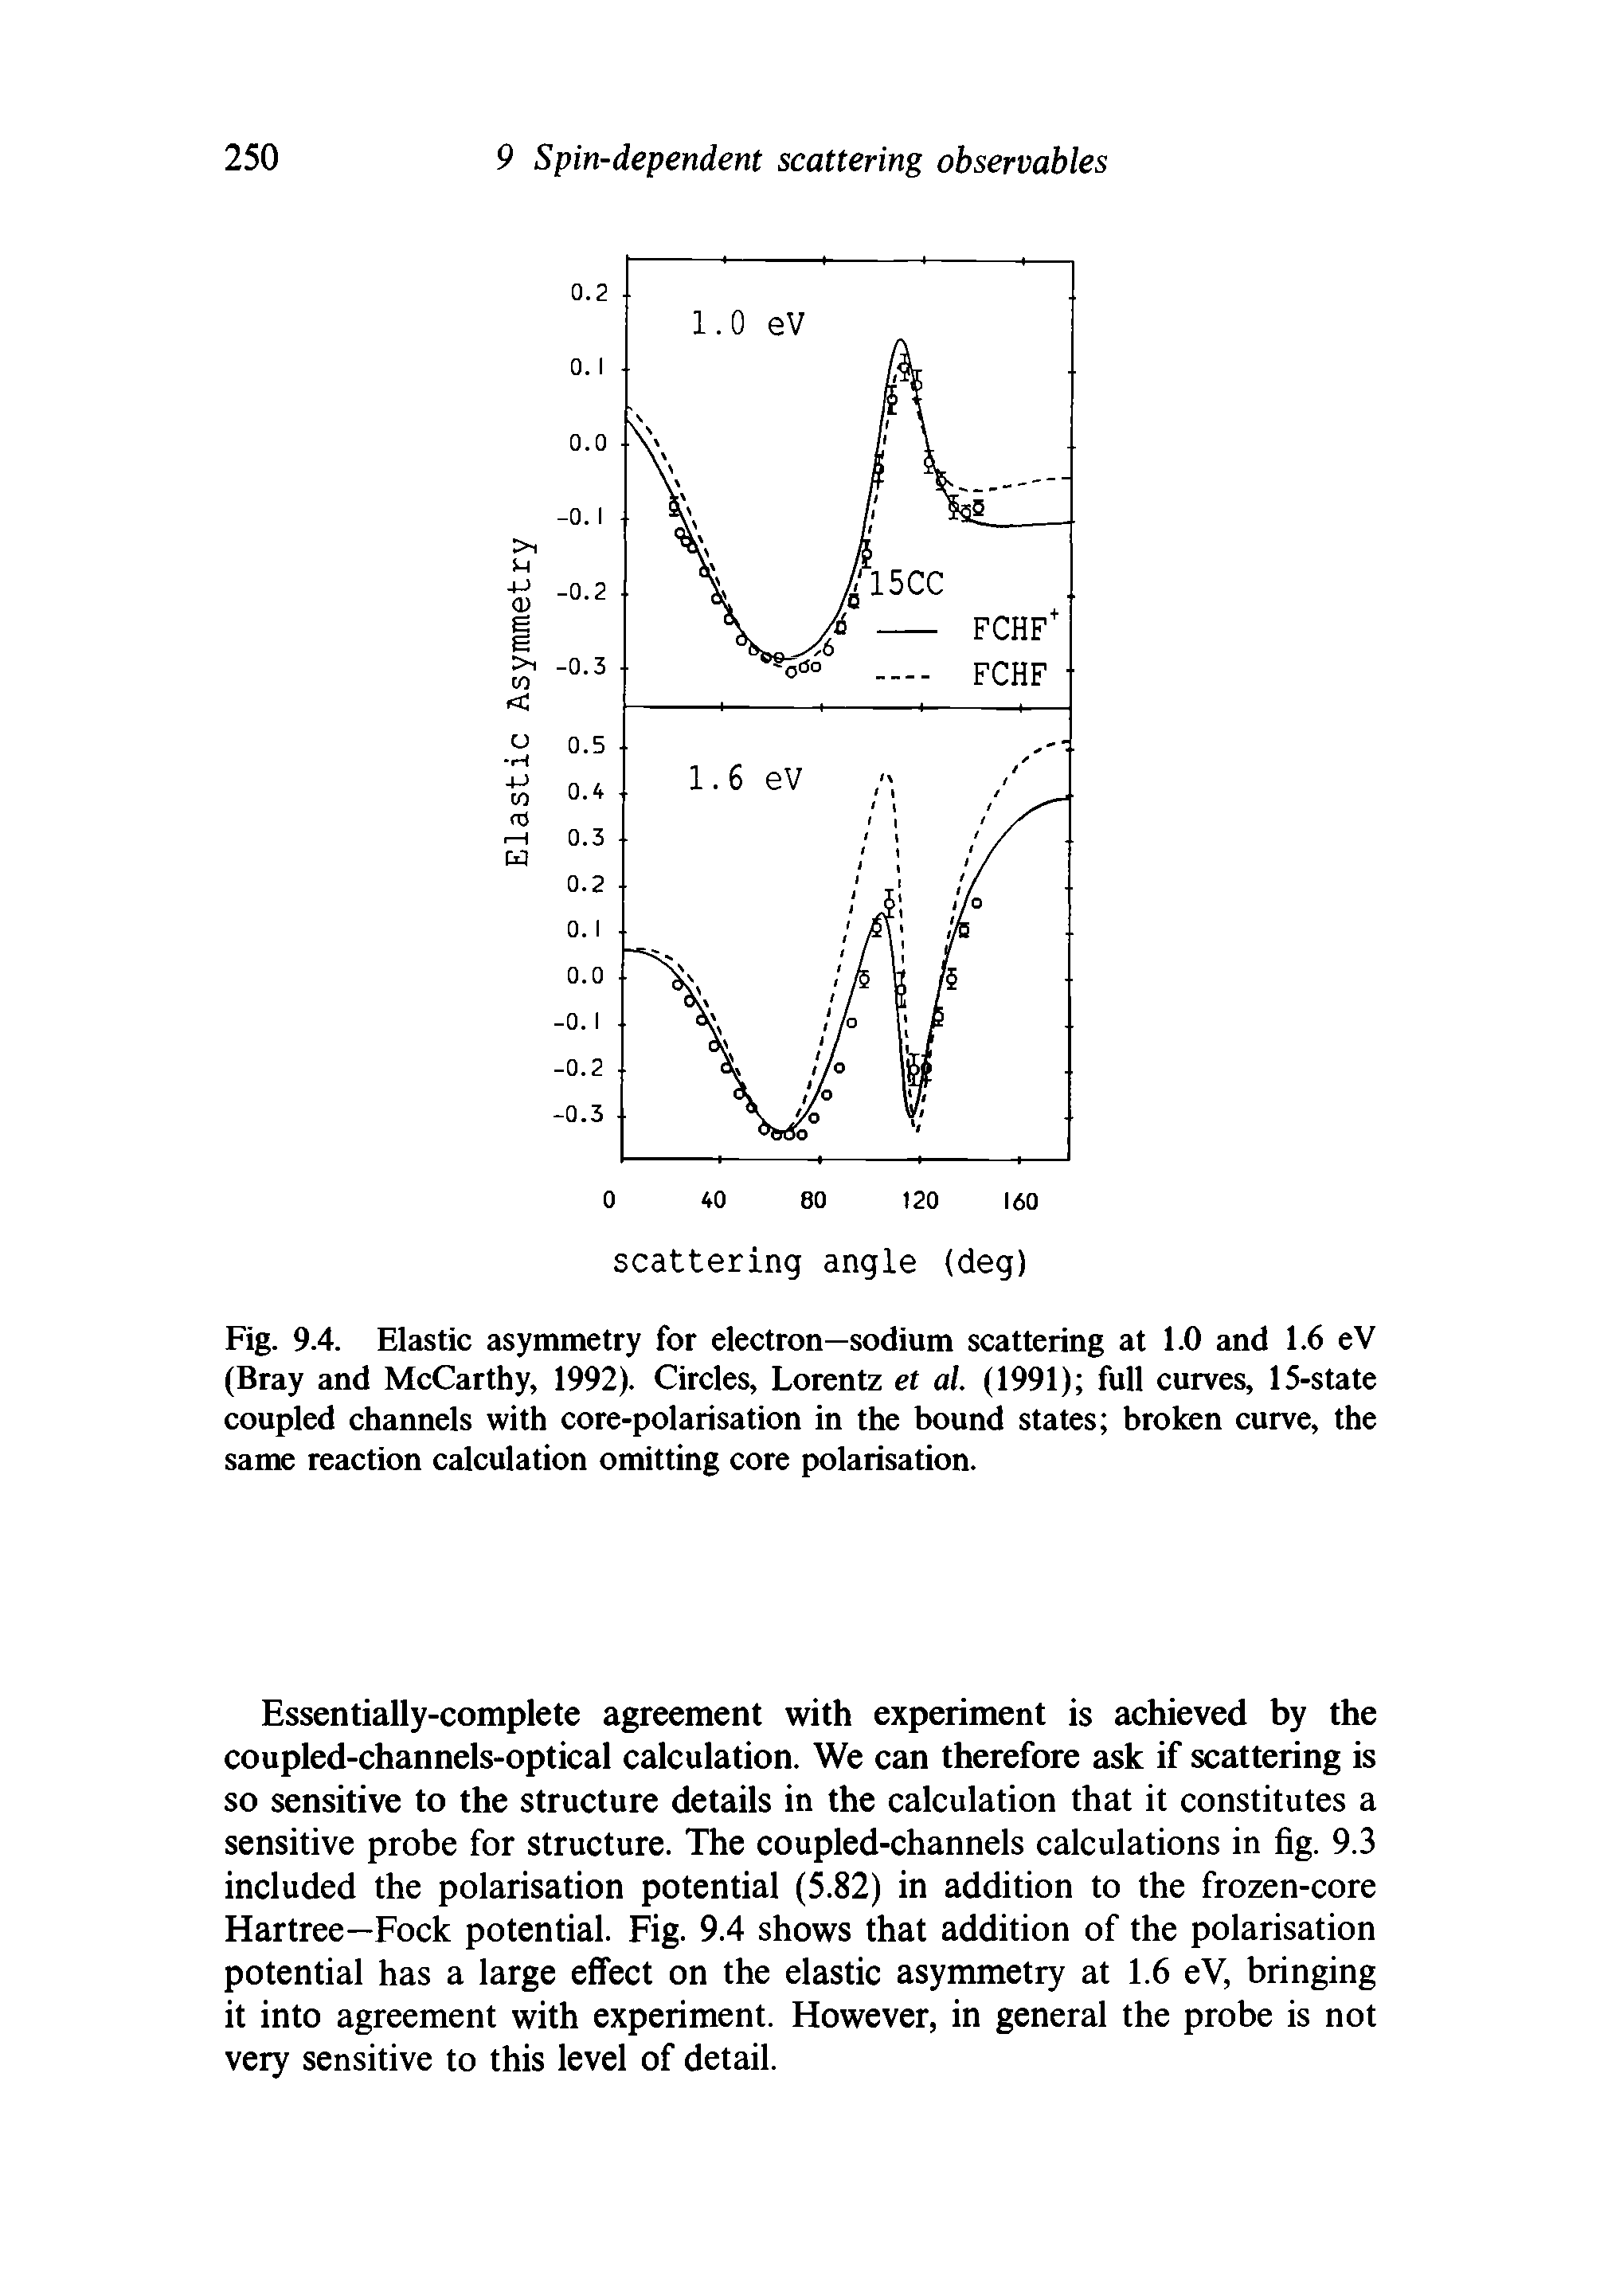 Fig. 9.4. Elastic asymmetry for electron—sodium scattering at 1.0 and 1.6 eV (Bray and McCarthy, 1992). Circles, Lorentz et al. (1991) full curves, 15-state coupled channels with core-polarisation in the bound states broken curve, the same reaction calculation omitting core polarisation.